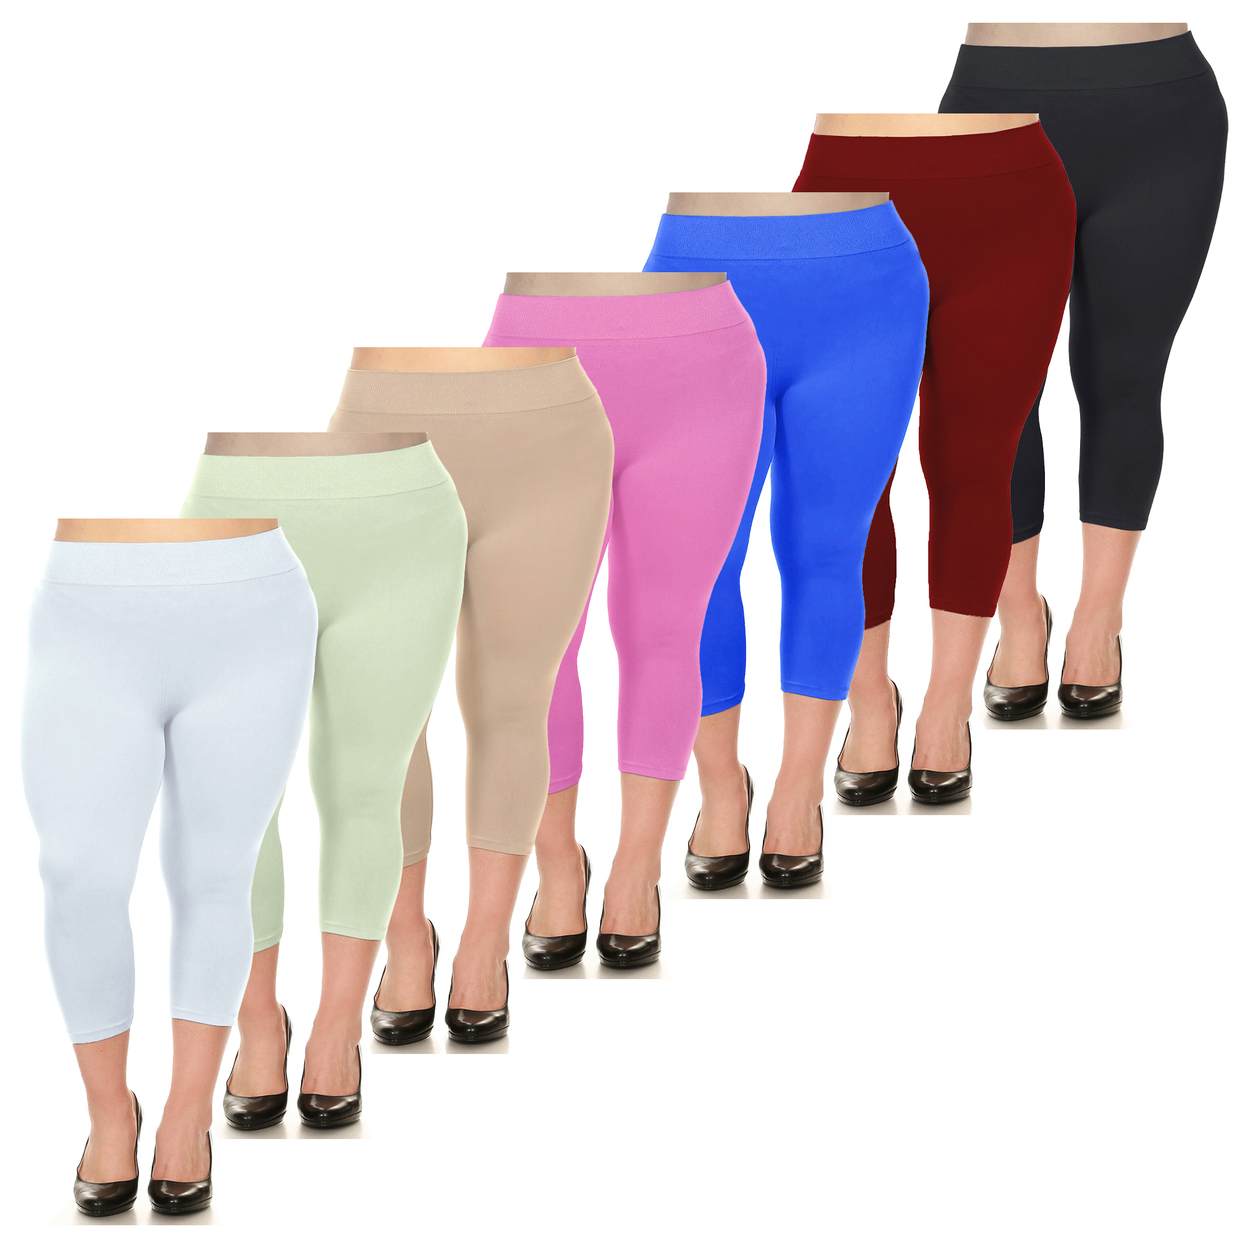 2-Pack: Women's Ultra-Soft High Waisted Smooth Stretch Active Yoga Capri Leggings Plus Size Available - Beige & Beige, 1x